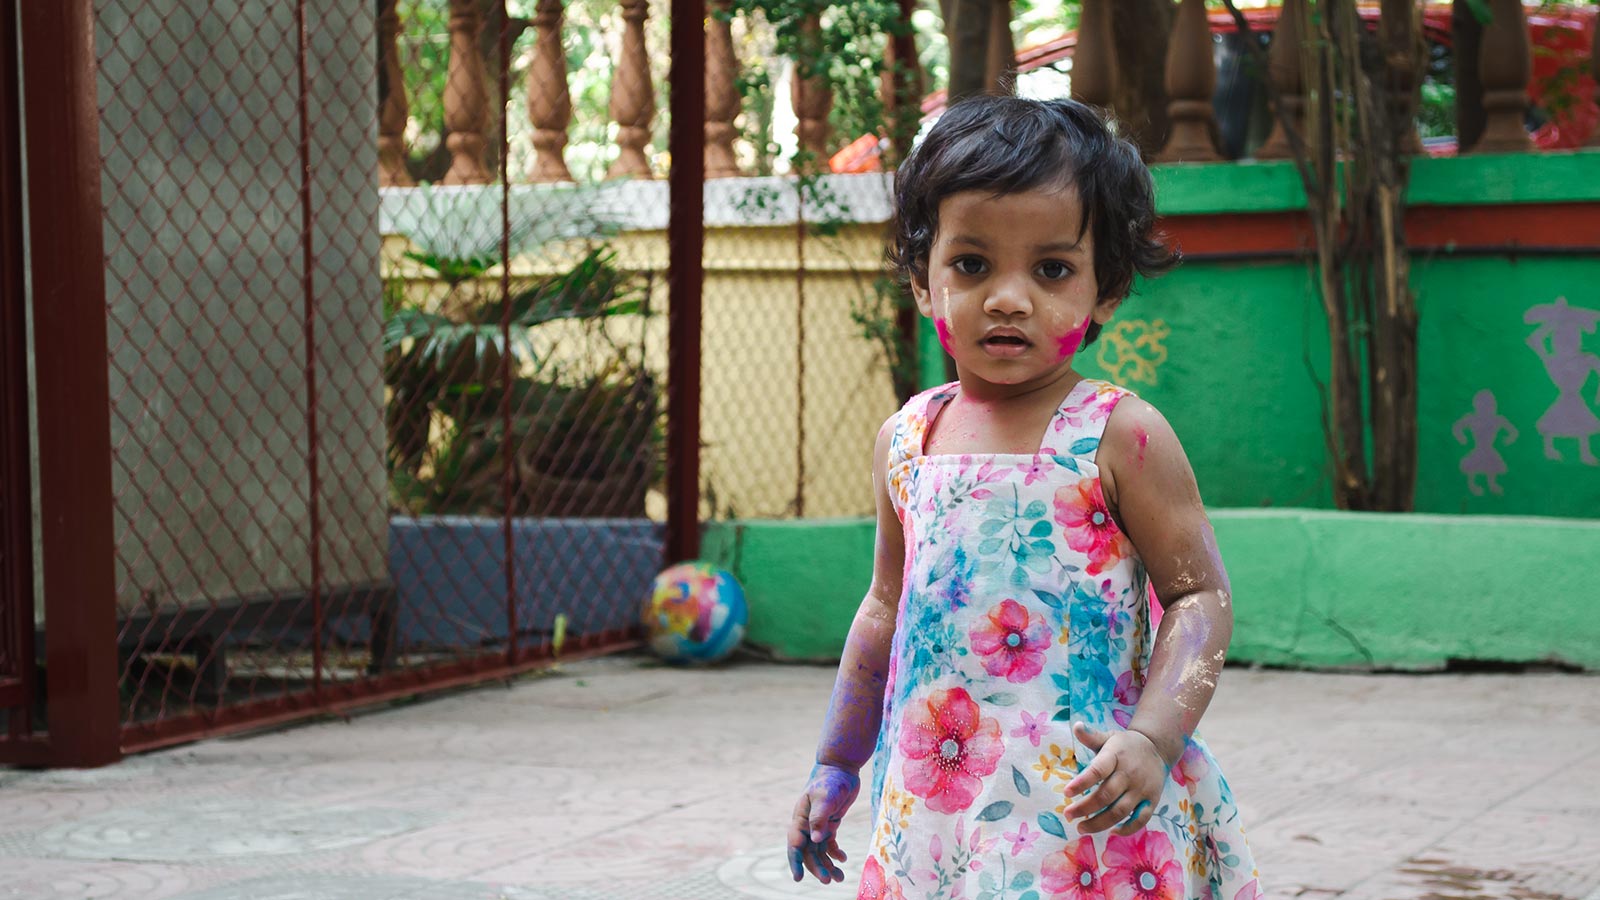 little girl in India with colorful dress